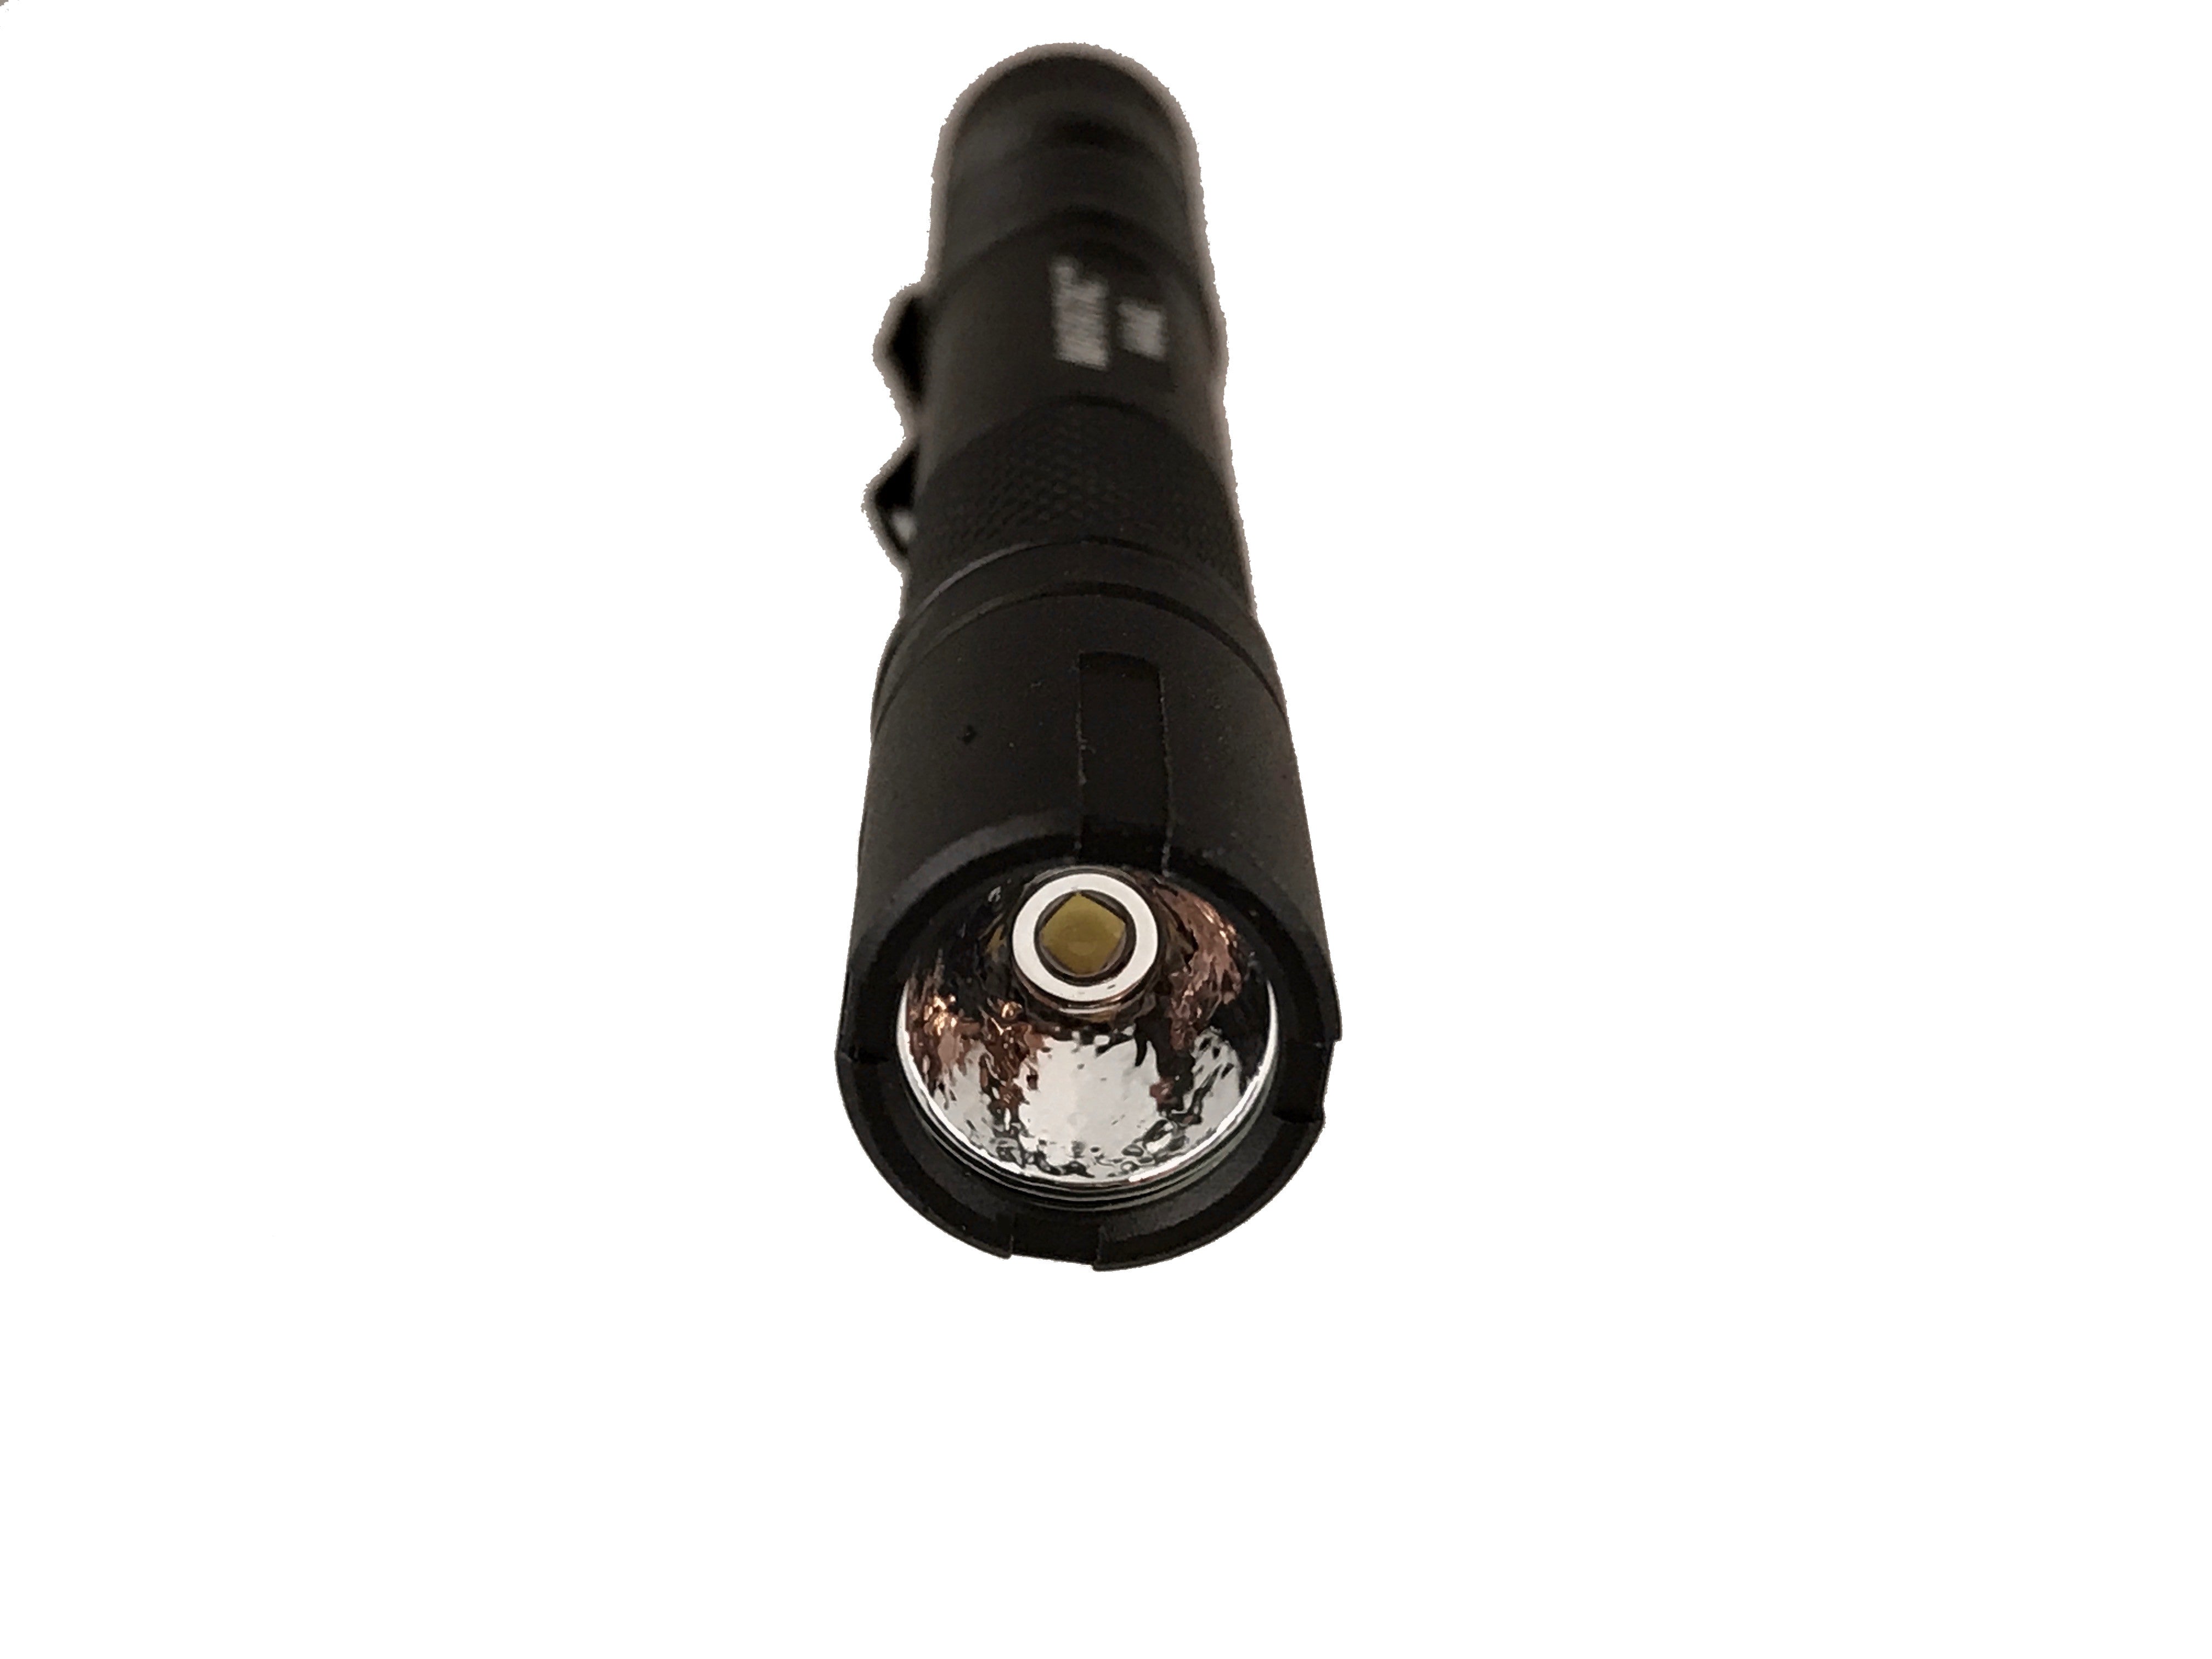 Inspection : AAAx2 Extreme  - Tactical Light by Maratac Rev 2 - CountyComm